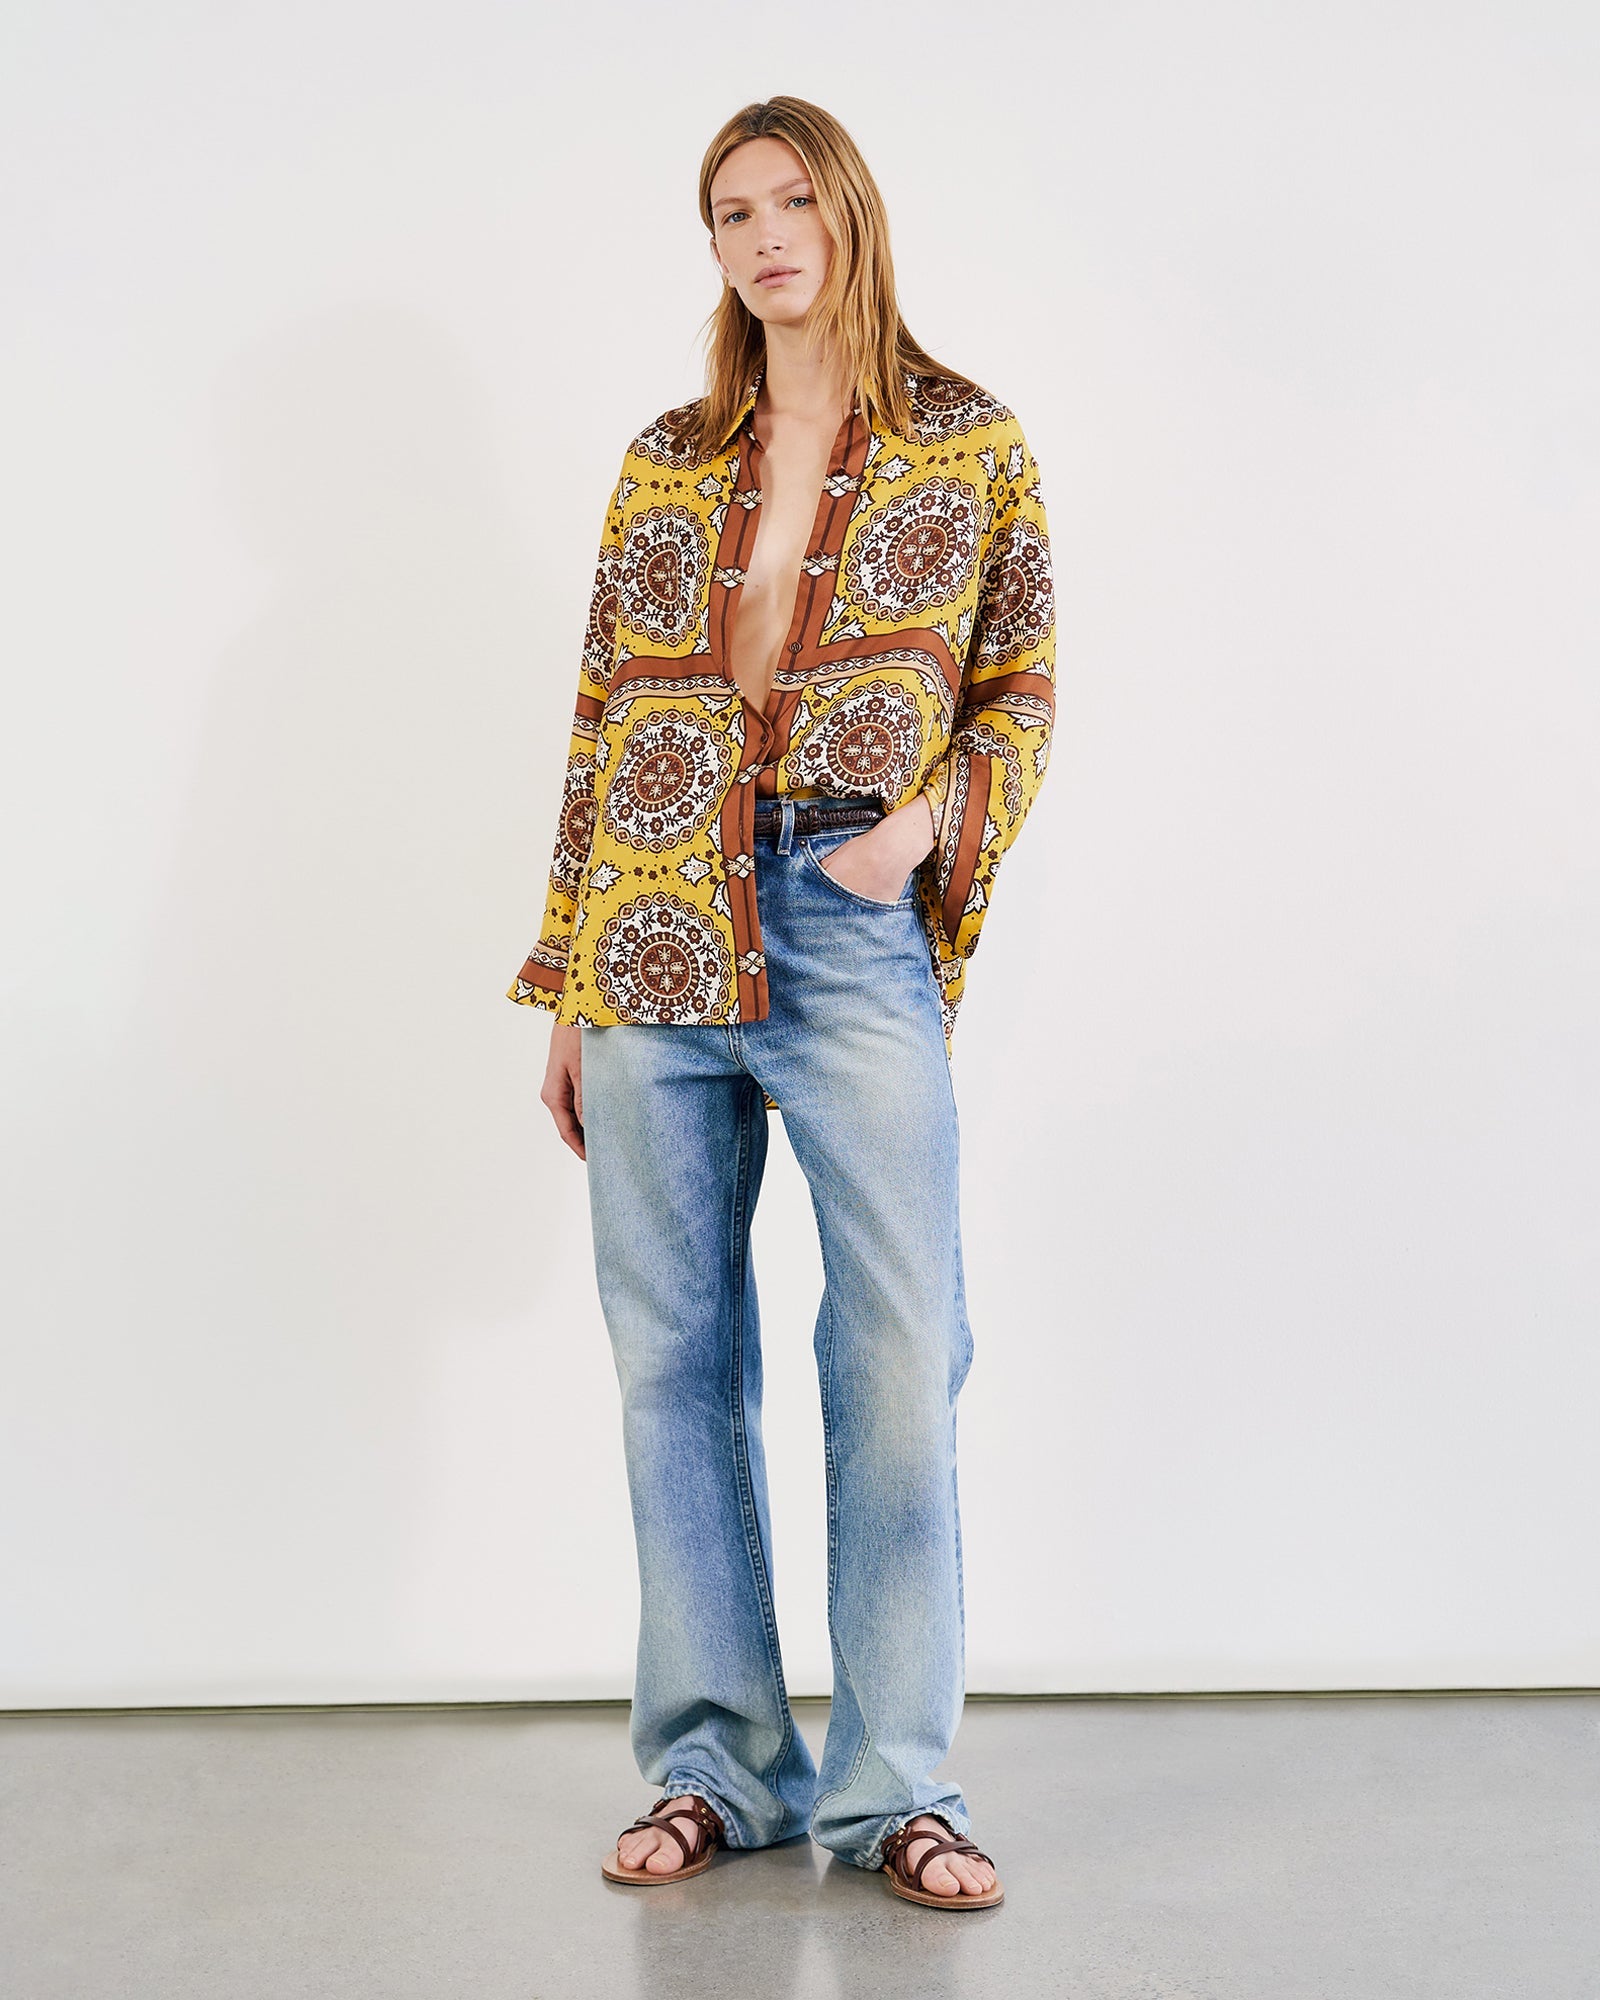 Nili Lotan Julien Shirt in Scarf Print Yellow available at TNT The New Trend Australia.